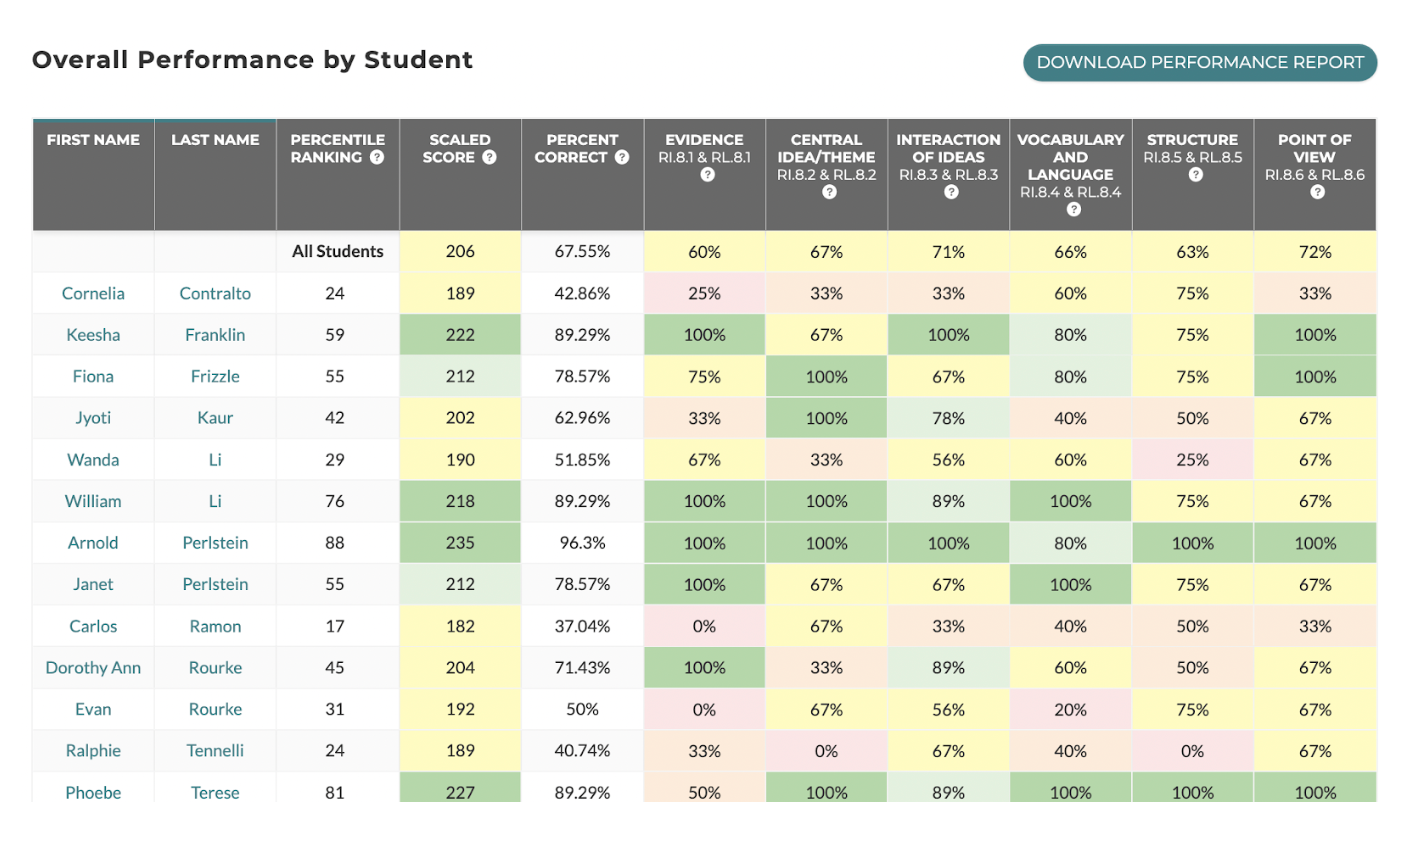 Table showing data for overall performance by students on assessments.